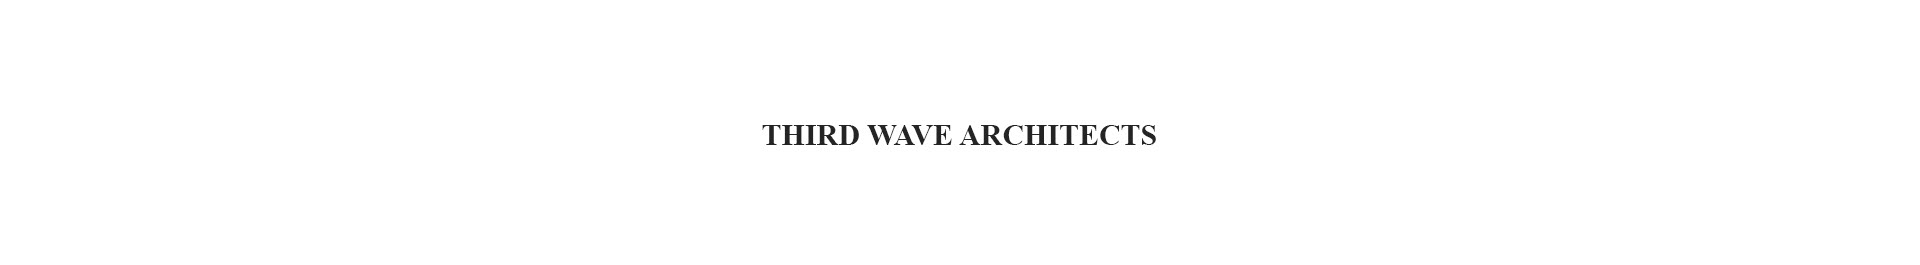 Third Wave Architects's profile banner